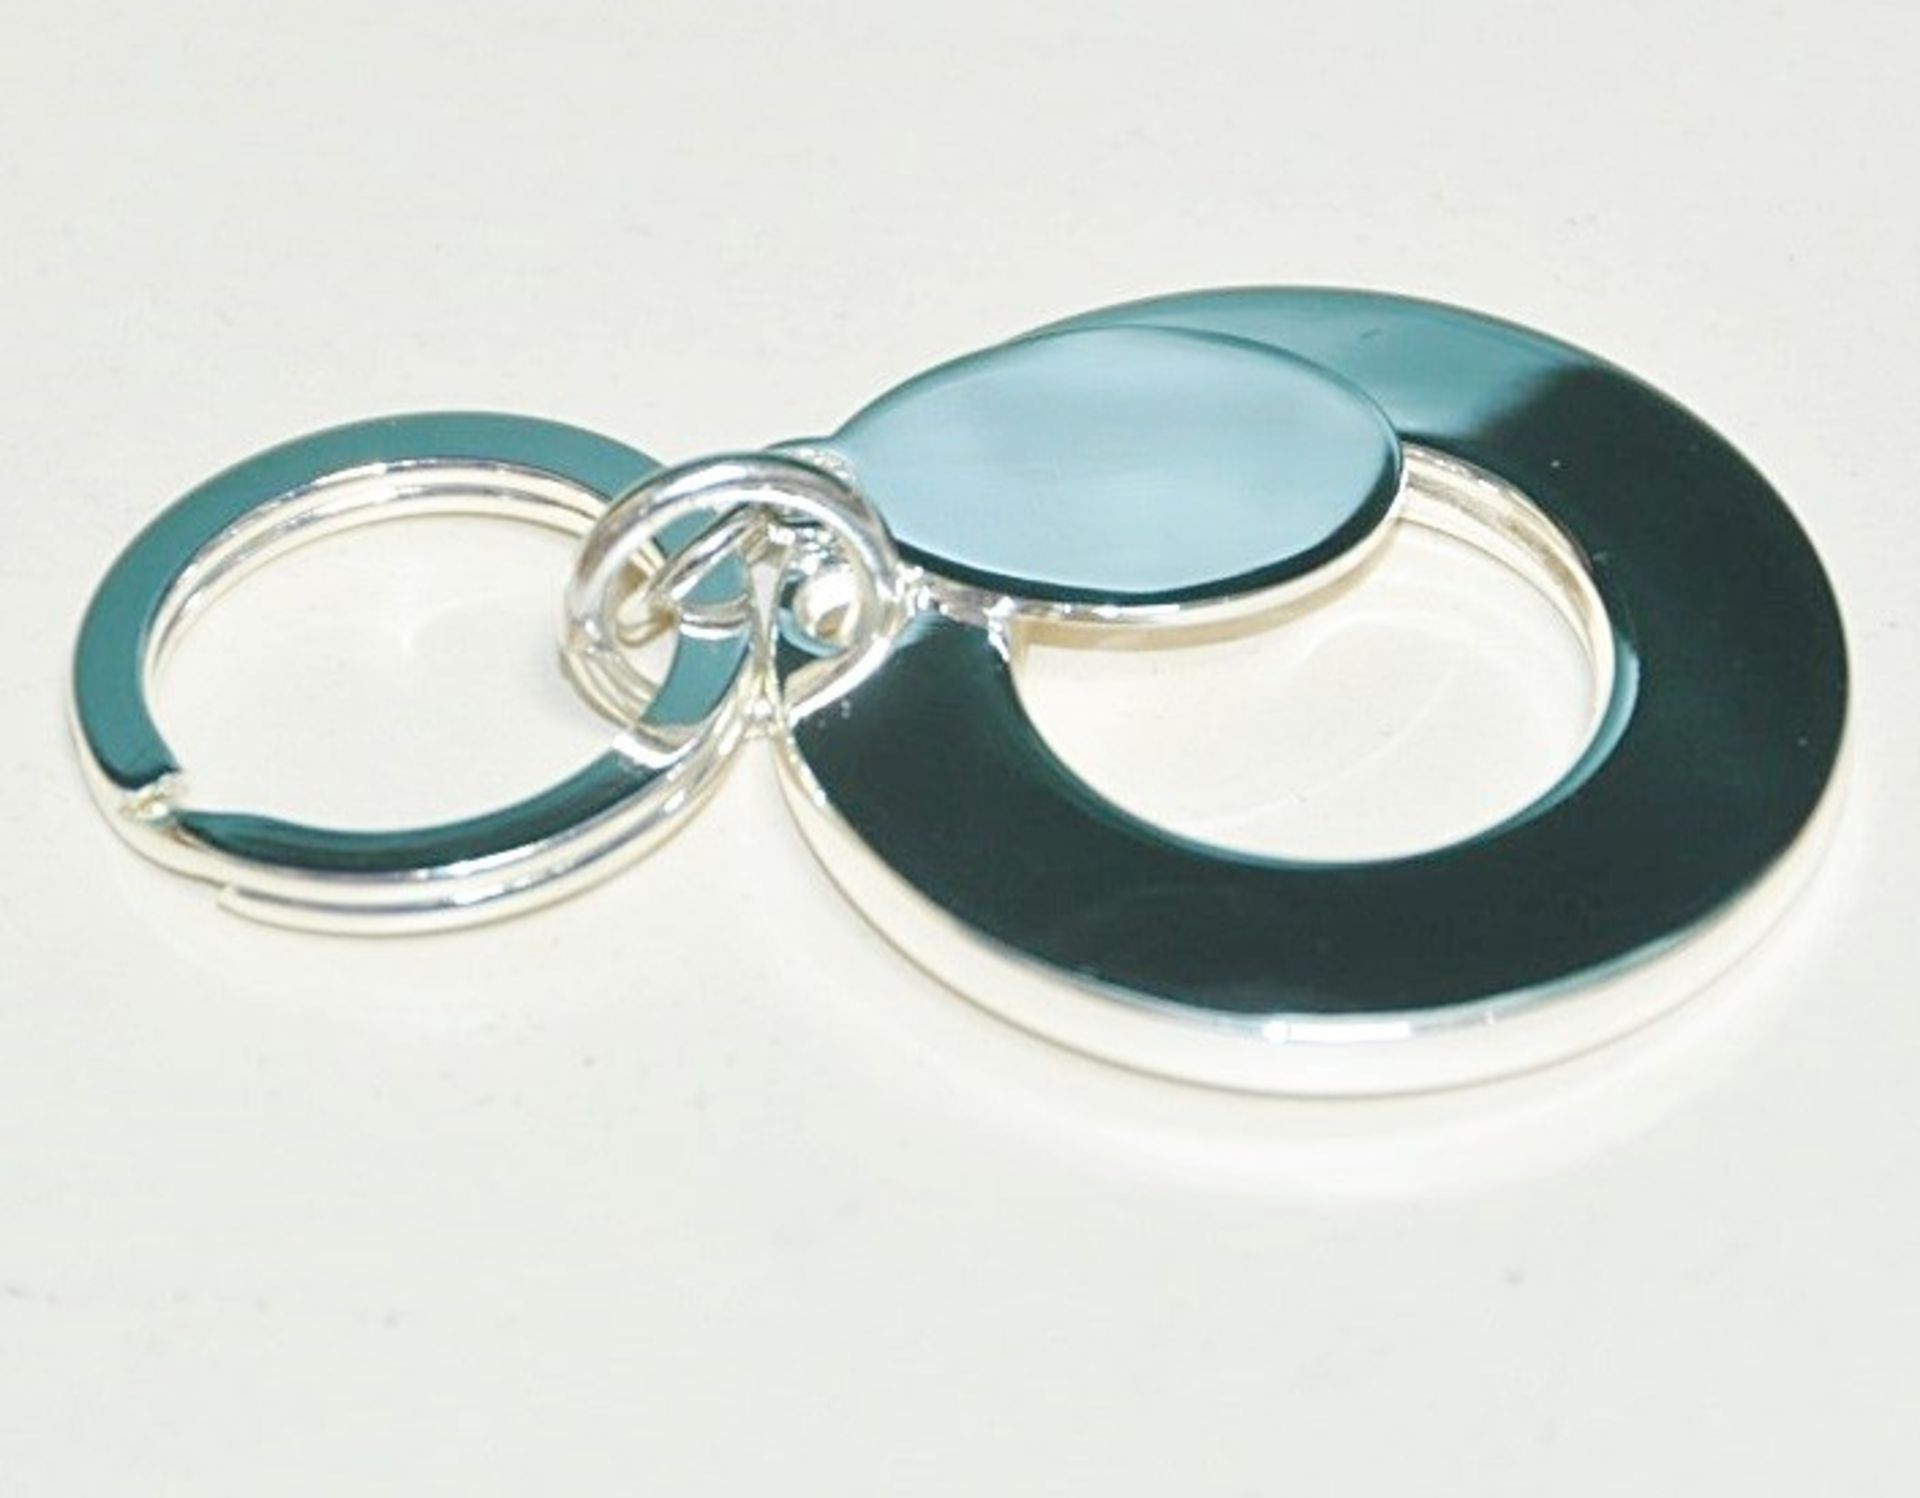 50 x Silver Plated Key Rings By ICE London - Design: SOLAR - MADE WITH "SWAROVSKI¨ ELEMENTS - Luxury - Image 4 of 4